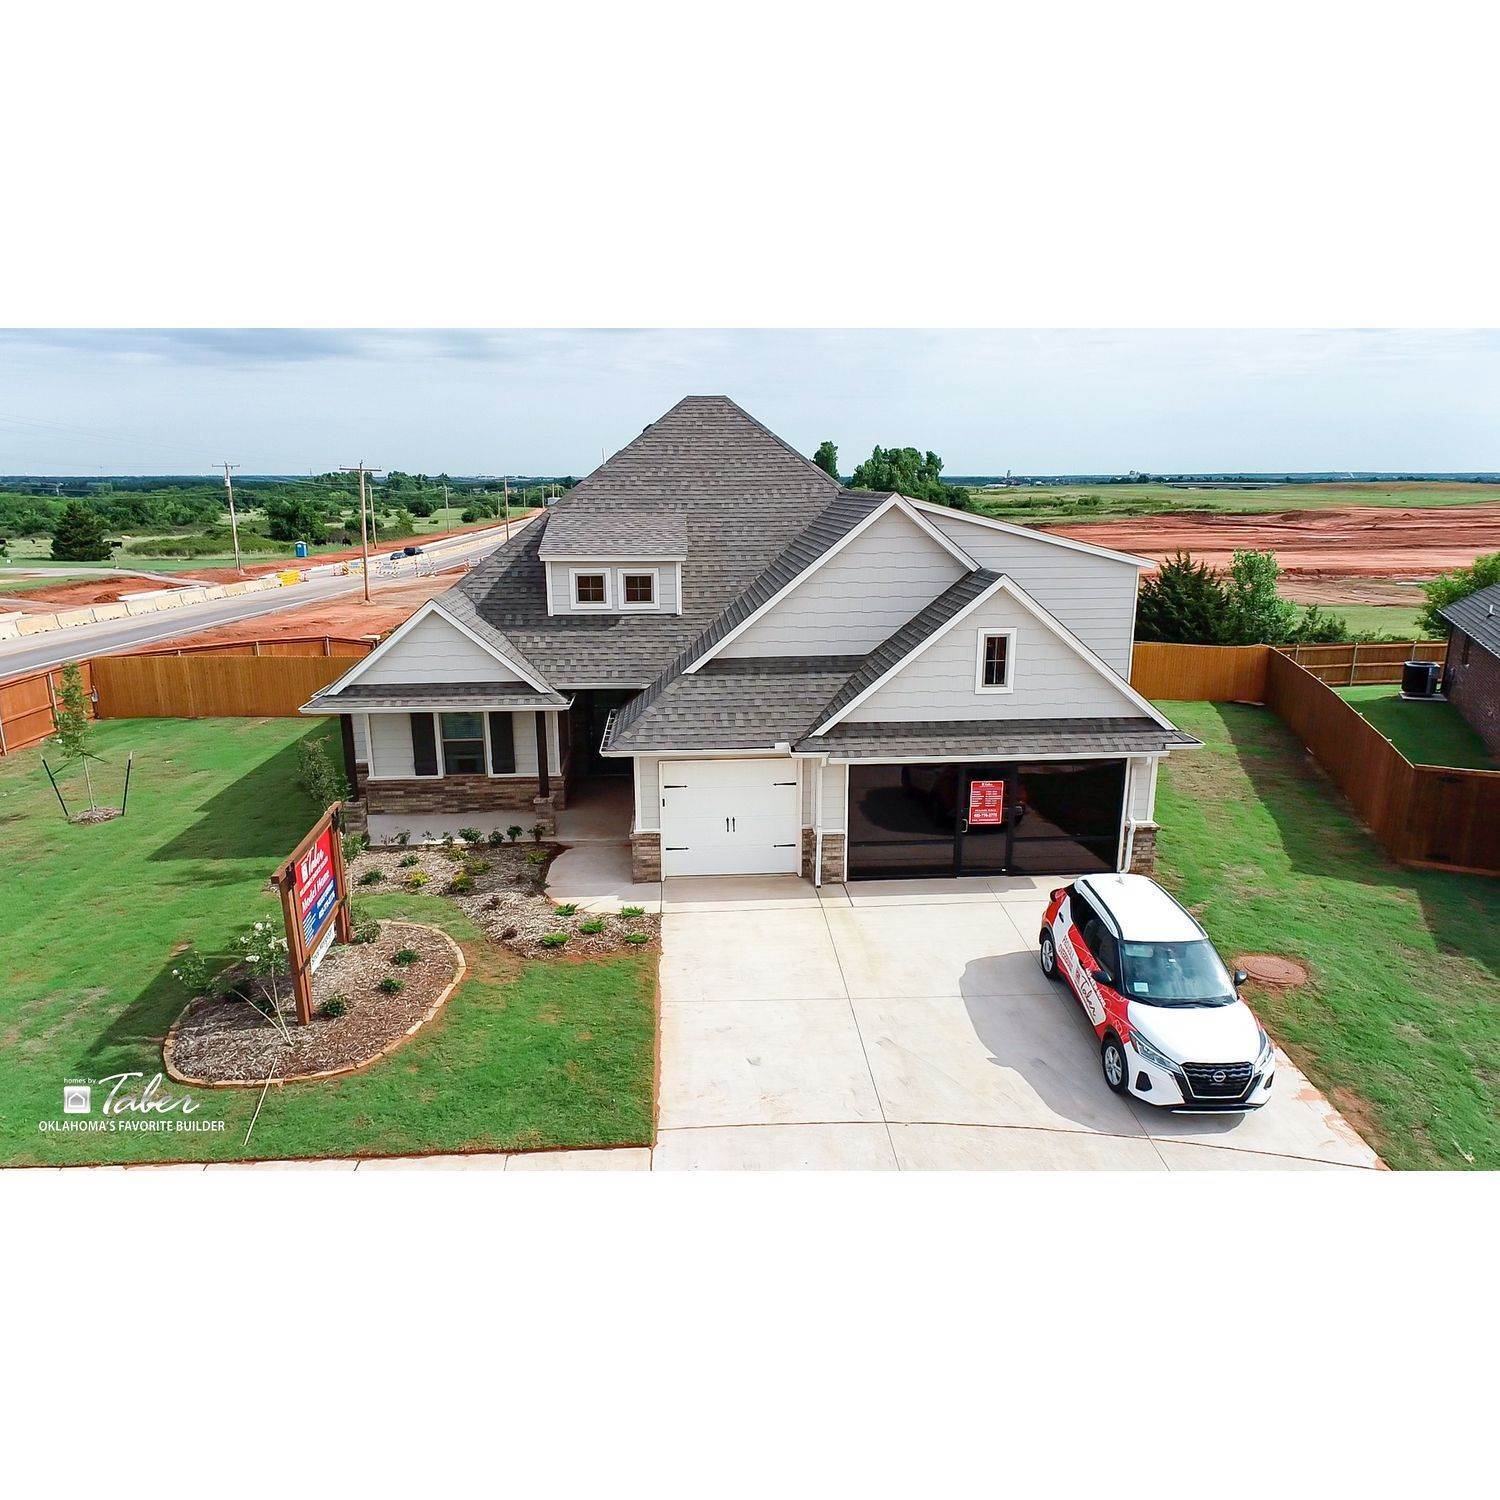 Canyons xây dựng tại 10533 SW 52nd St, Mustang, OK 73064